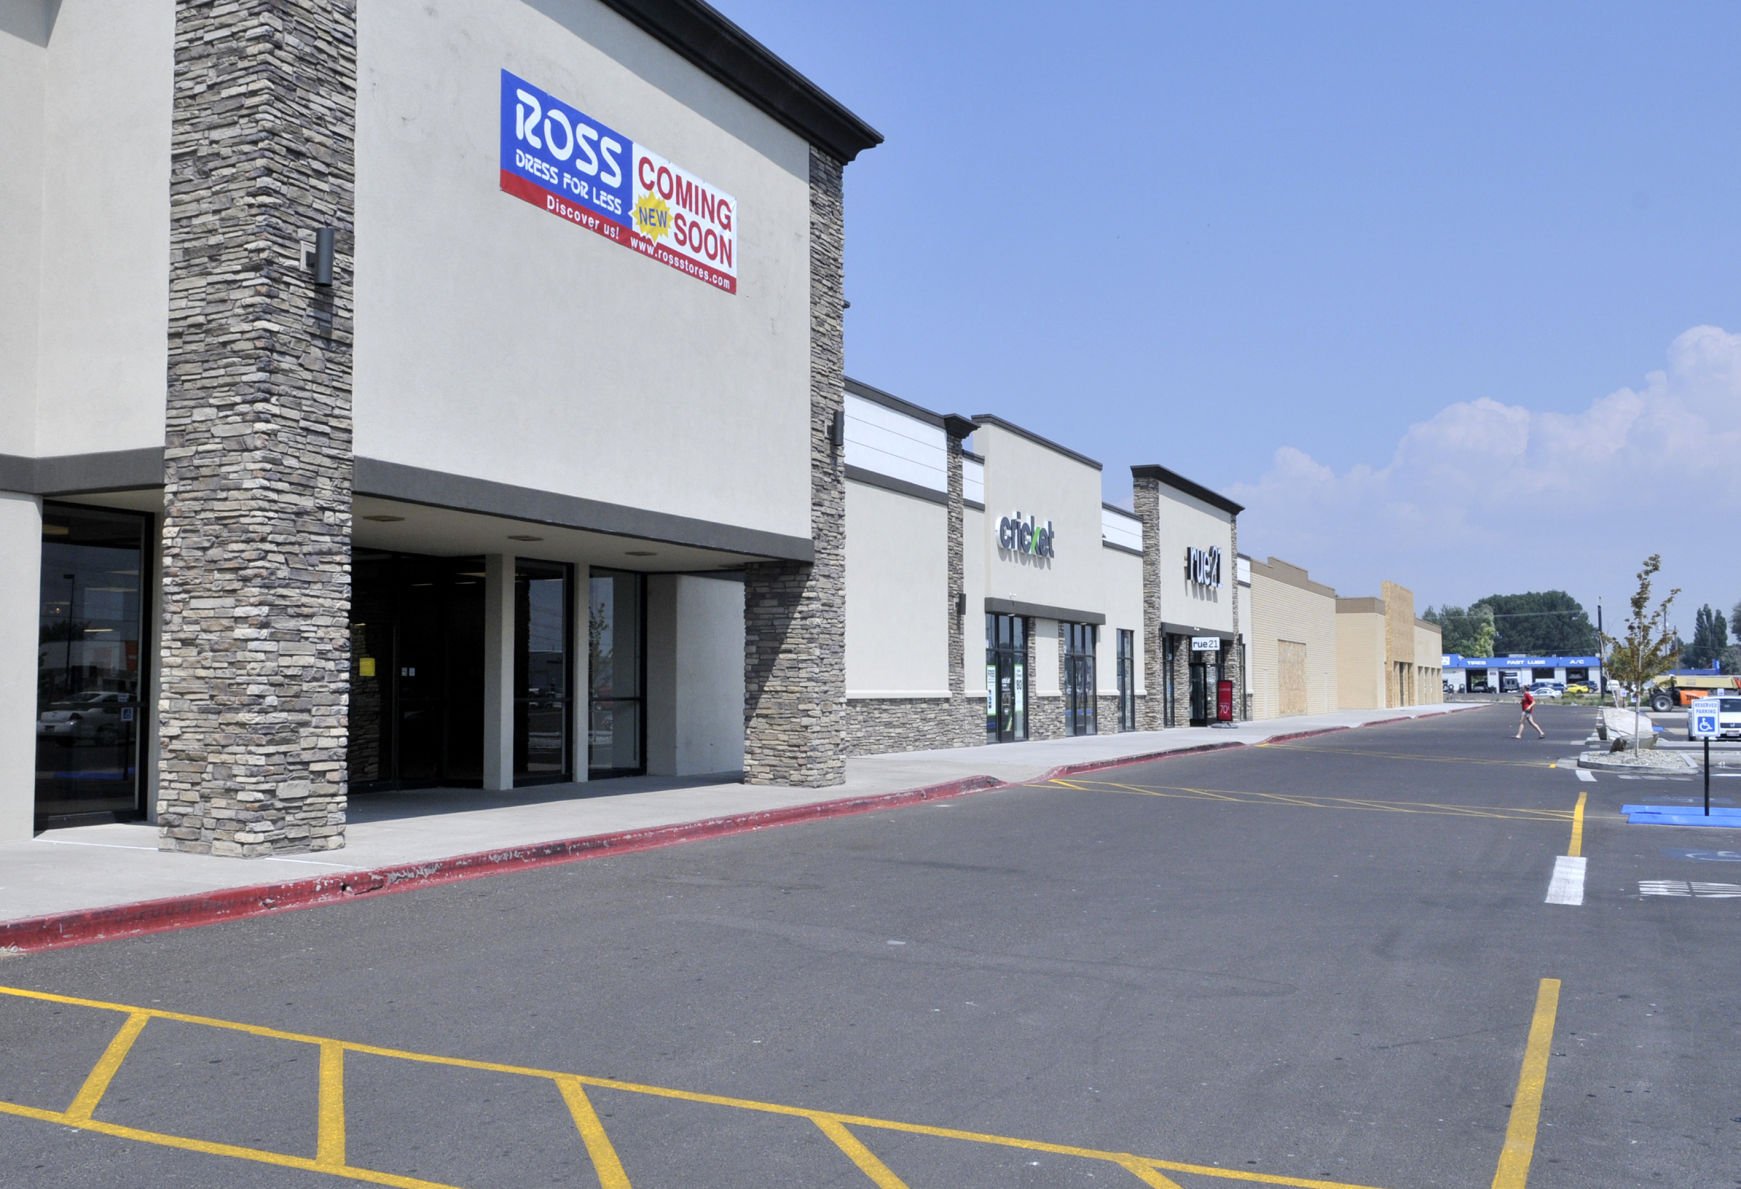 Ross Dress for Less to open Burley 